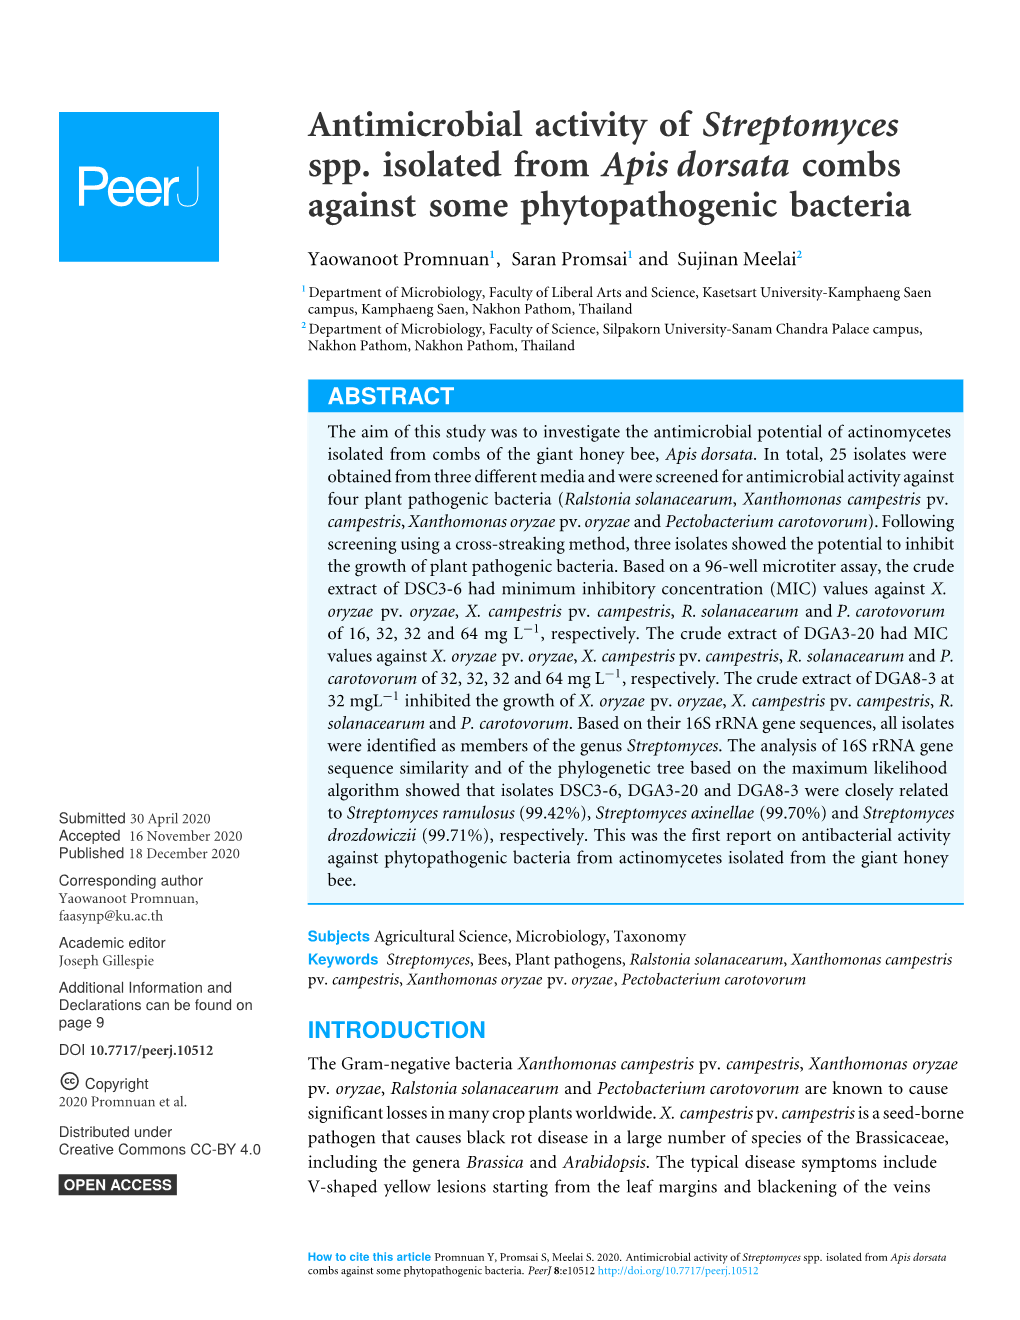 Antimicrobial Activity of Streptomyces Spp. Isolated from Apis Dorsata Combs Against Some Phytopathogenic Bacteria